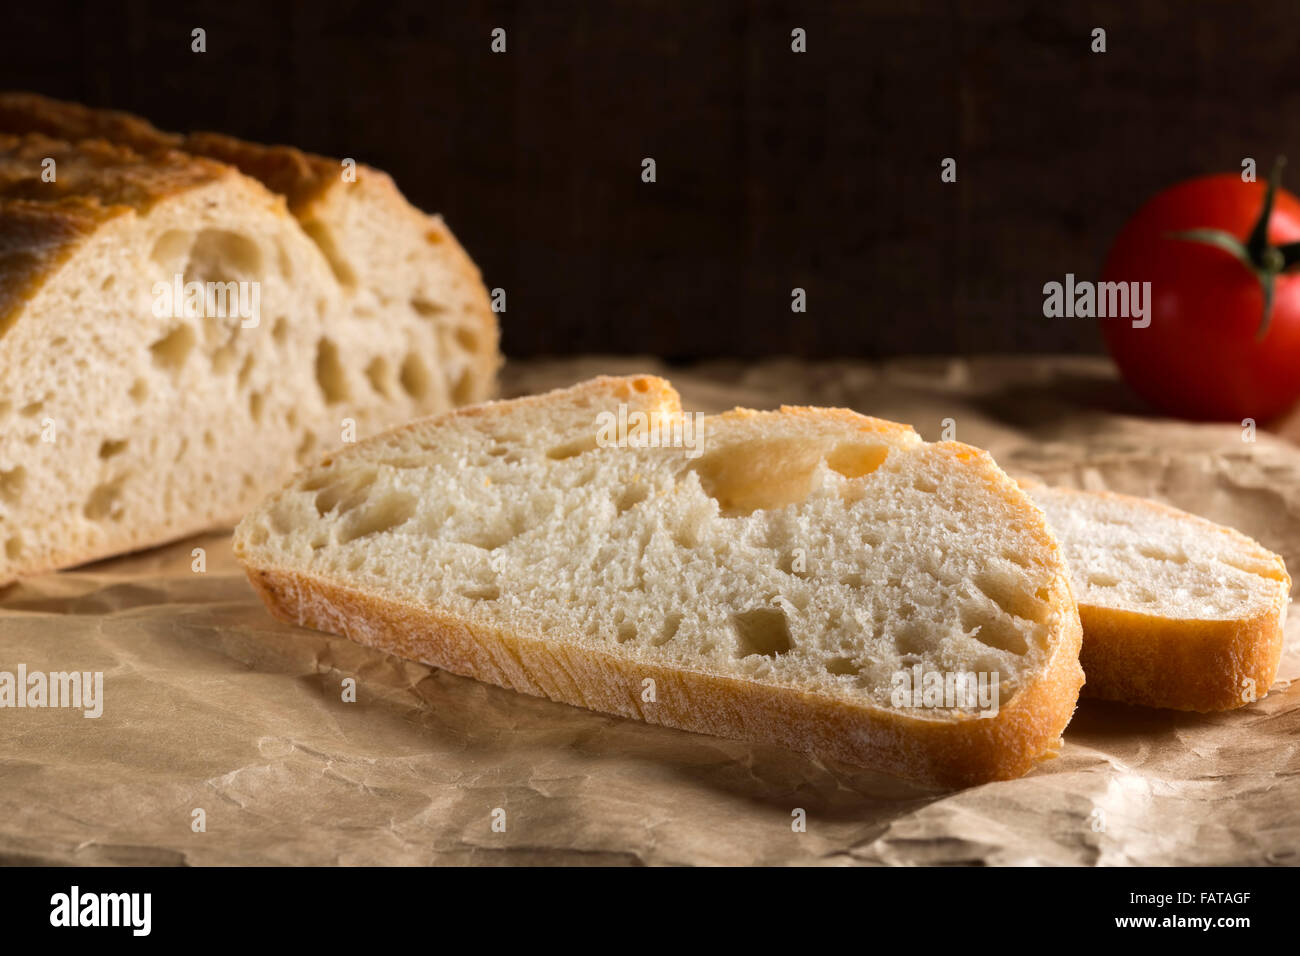 Sliced fresh white bread with browned crust and tomato over paper Stock Photo